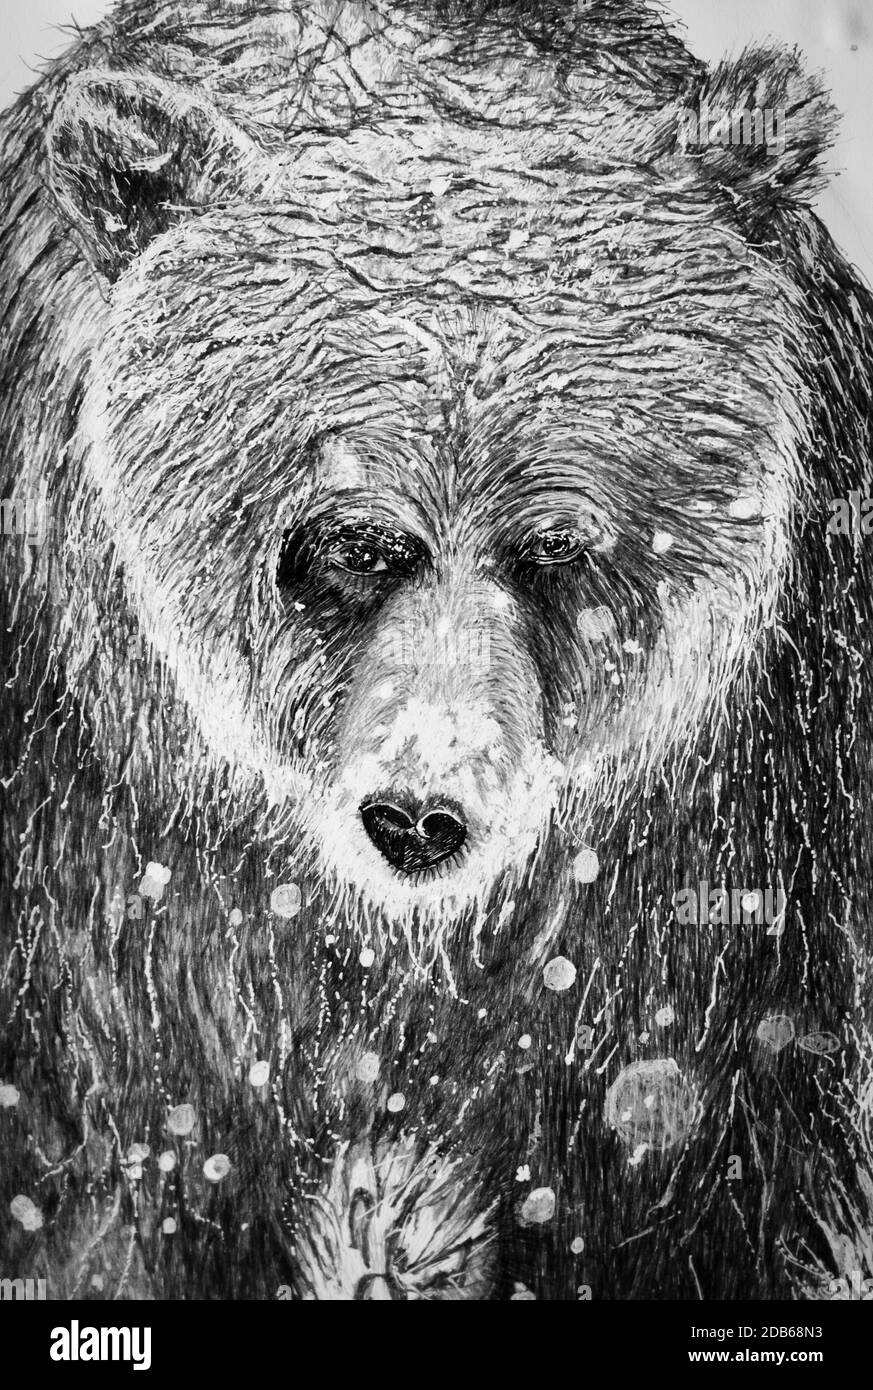 Snowy Grizzly Bear drawing Stock Photo